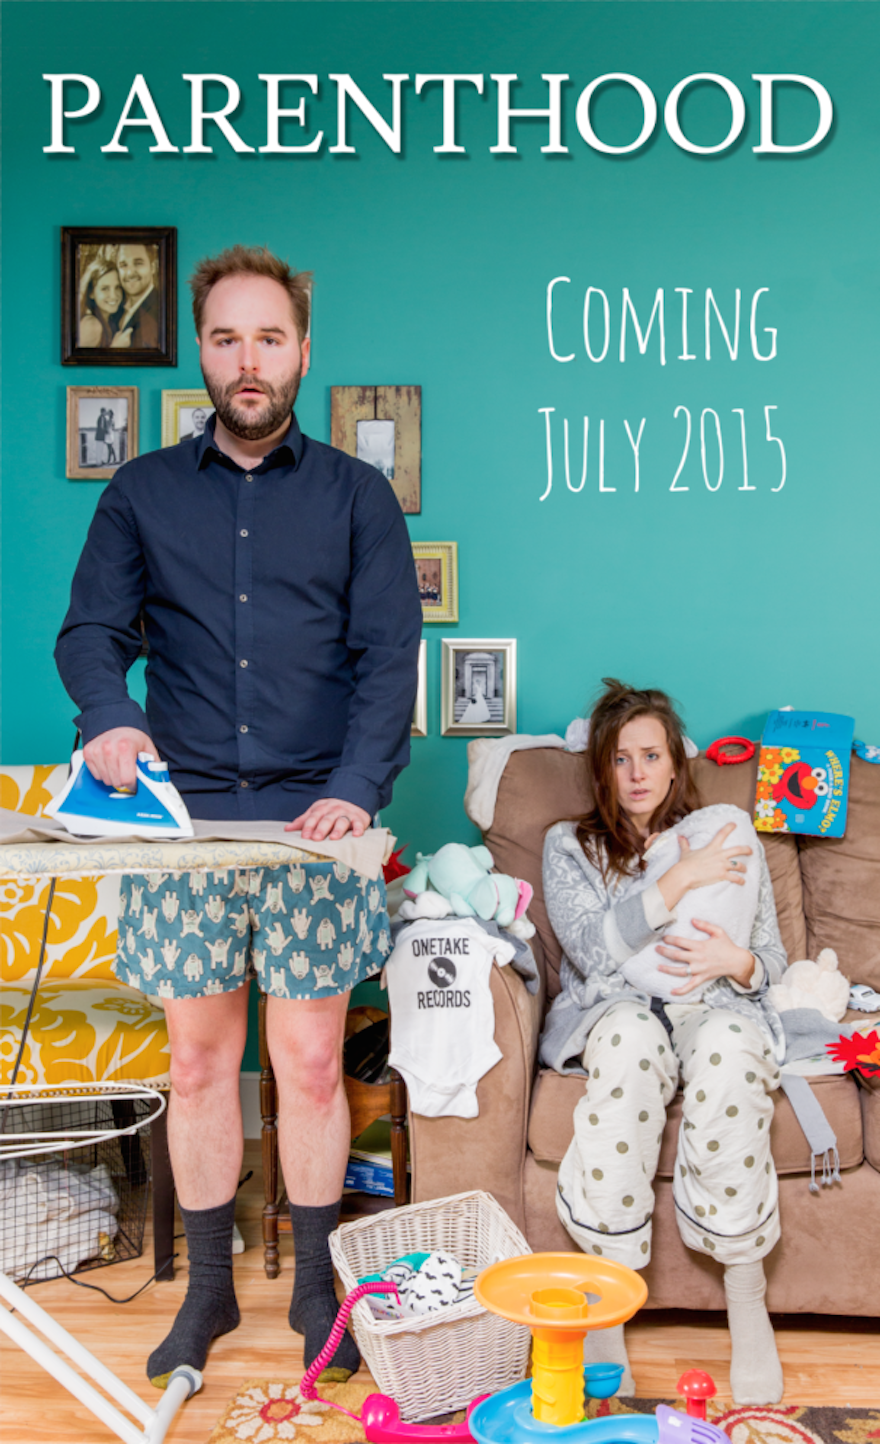 30 Of The Most Creative Baby Announcements Ever - A Sneak Preview Of What’s To Come